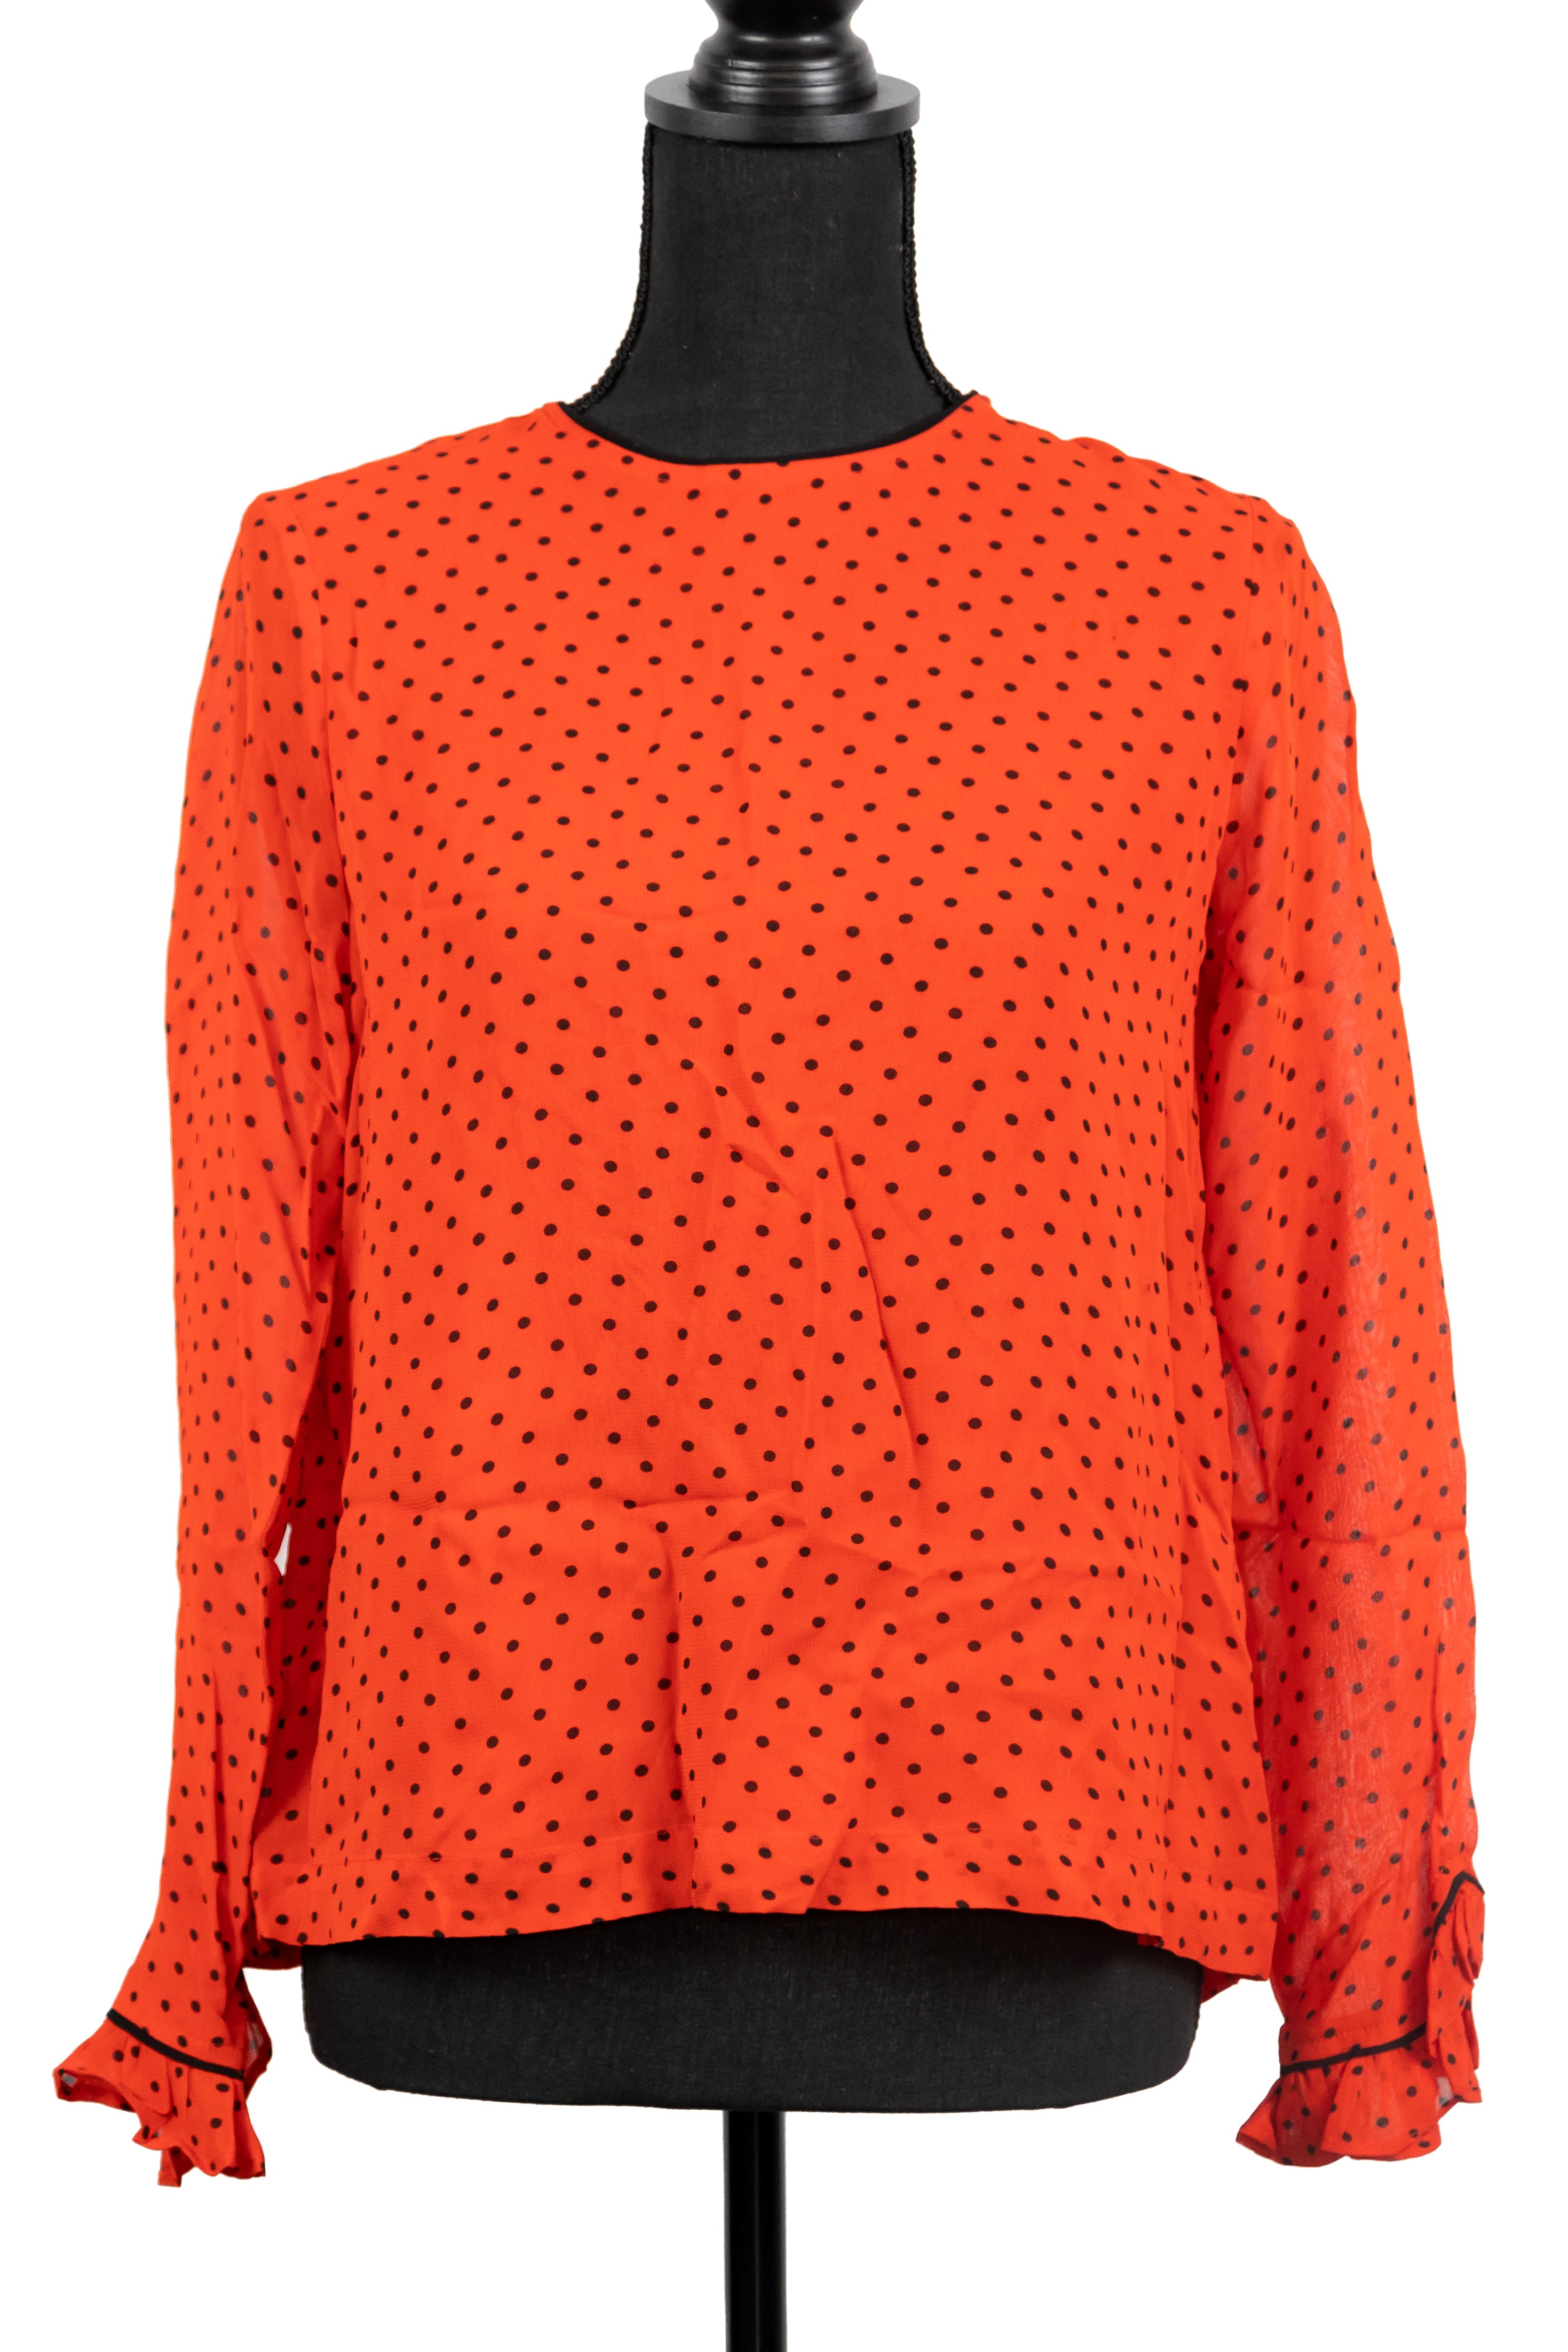 Red and Black Polka Dot Blouse As Seen on Hallmark - Size Small